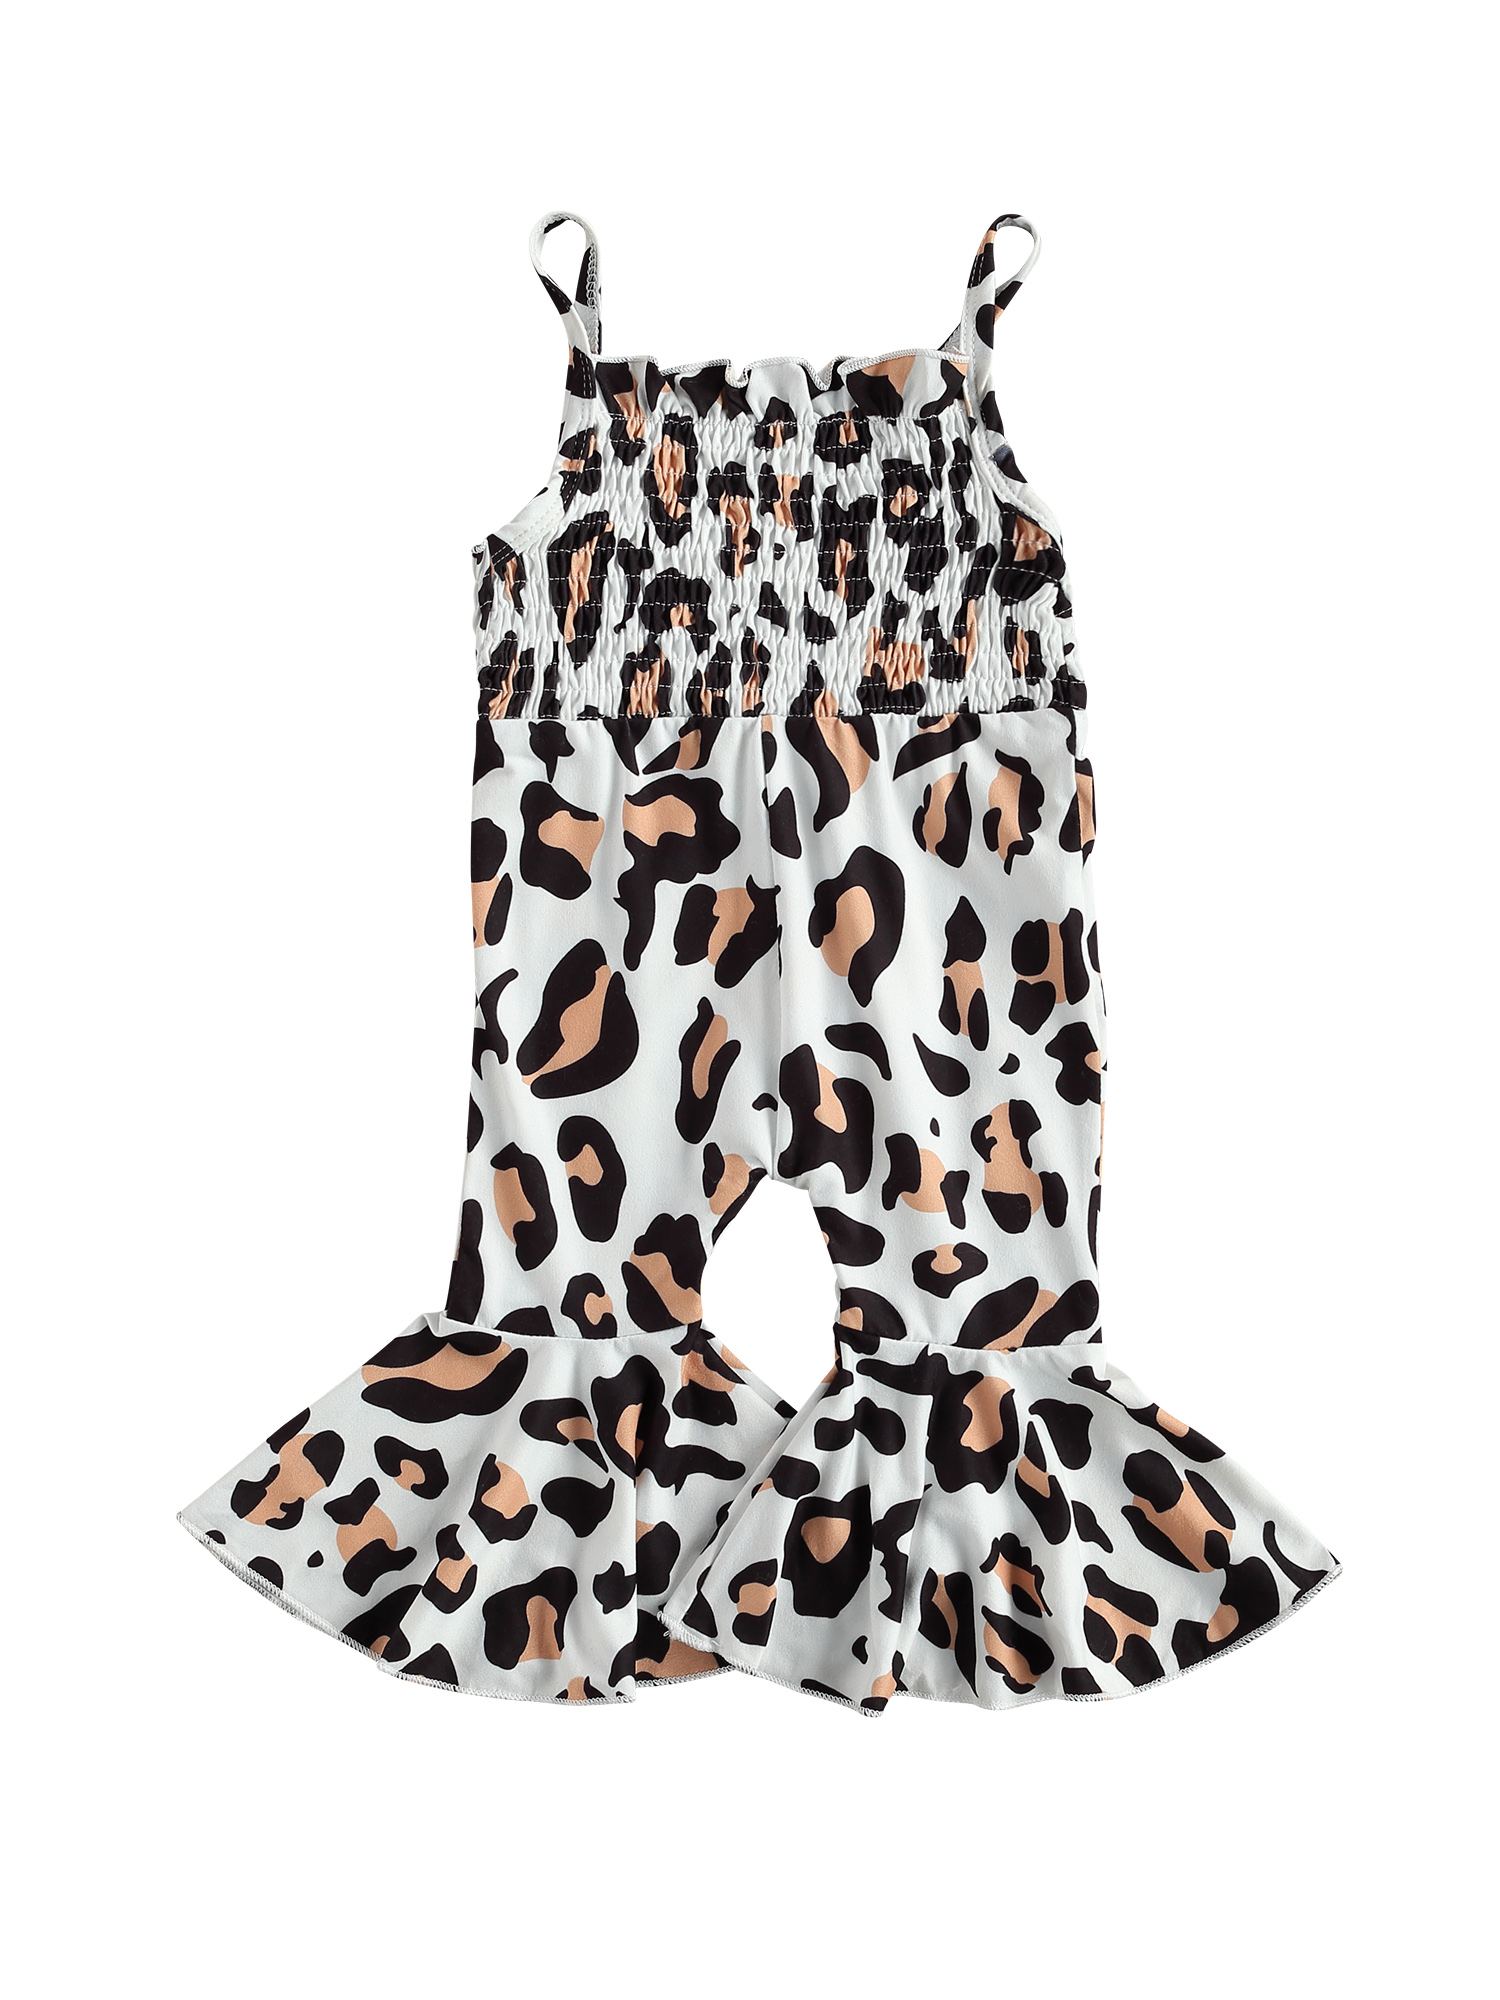 Toddler Girls Baby Kids Jumpsuit One Piece Leopard Strap Romper Summer Outfits